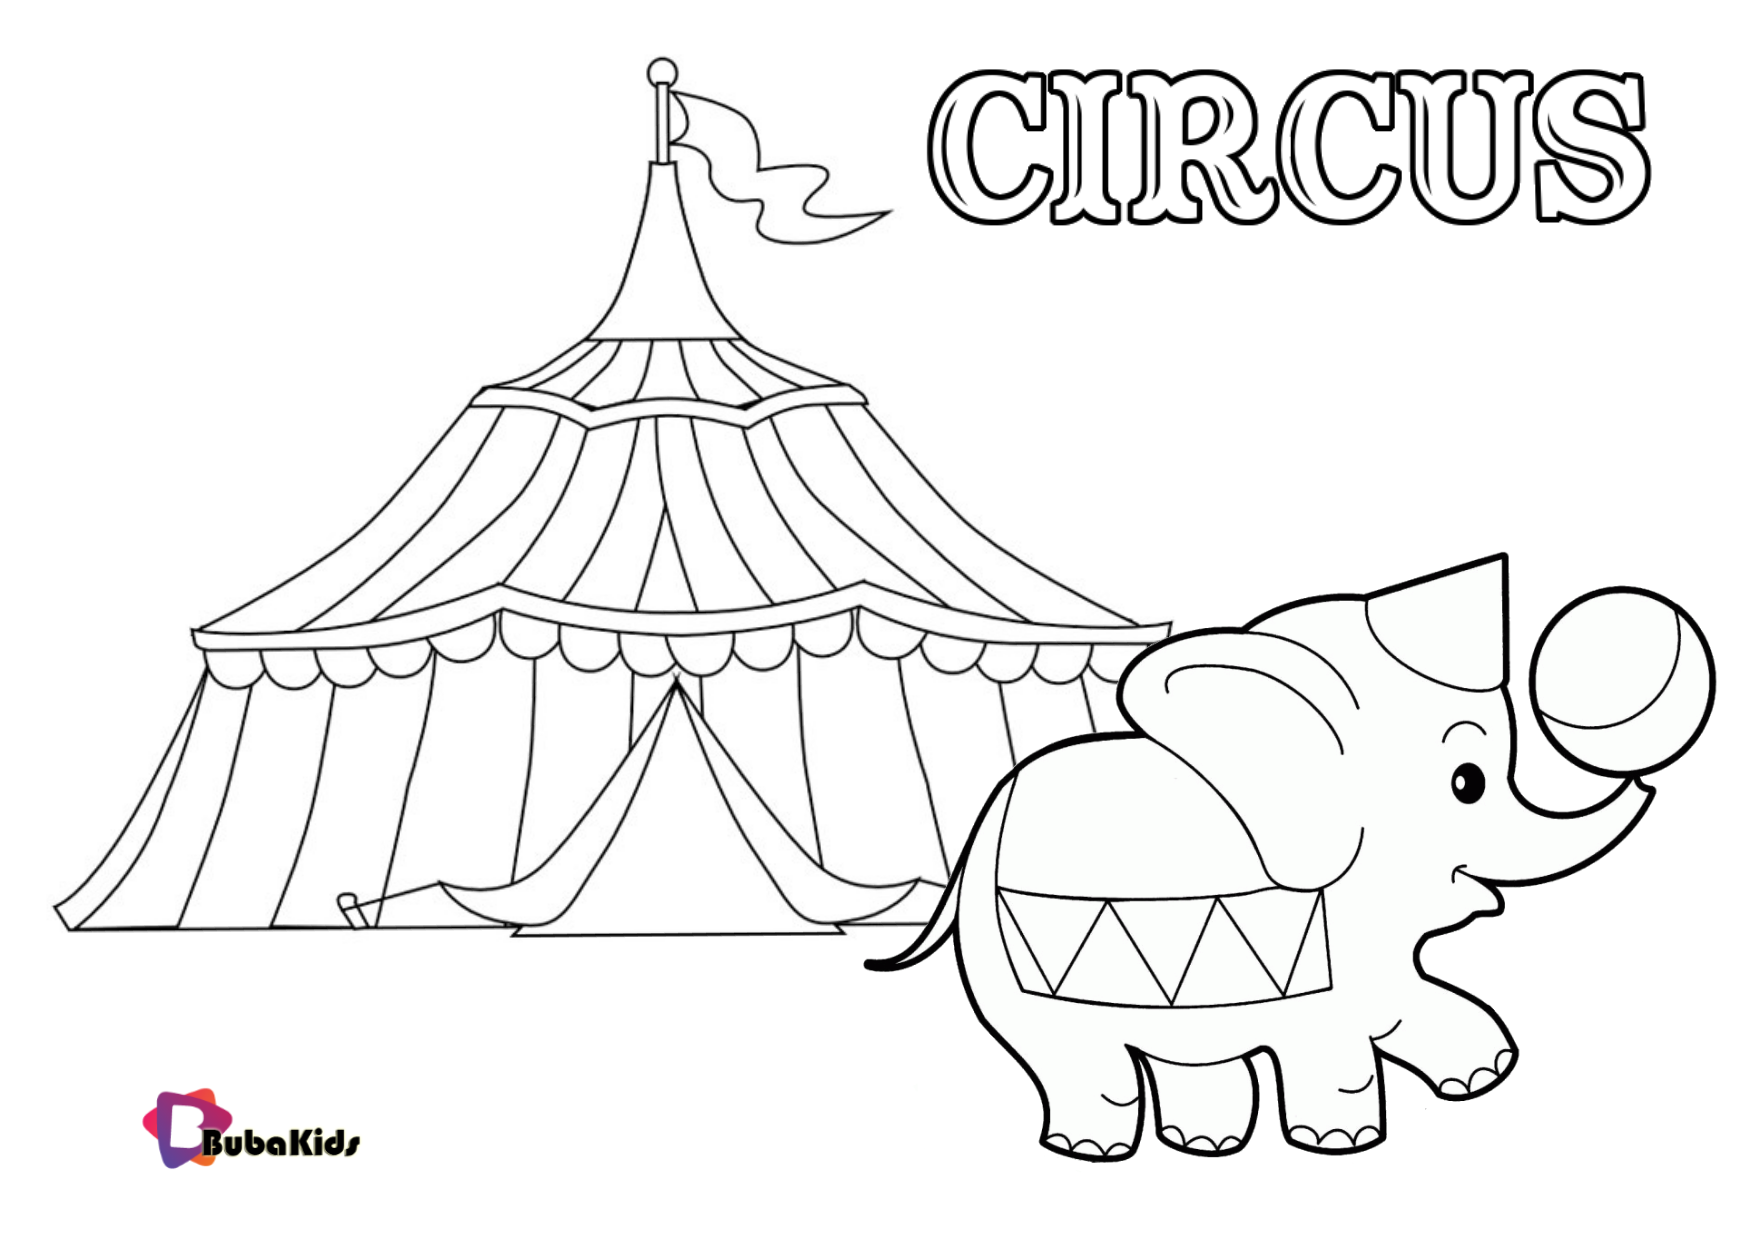 Circus tent and elephant easy and simple coloring page for preschool